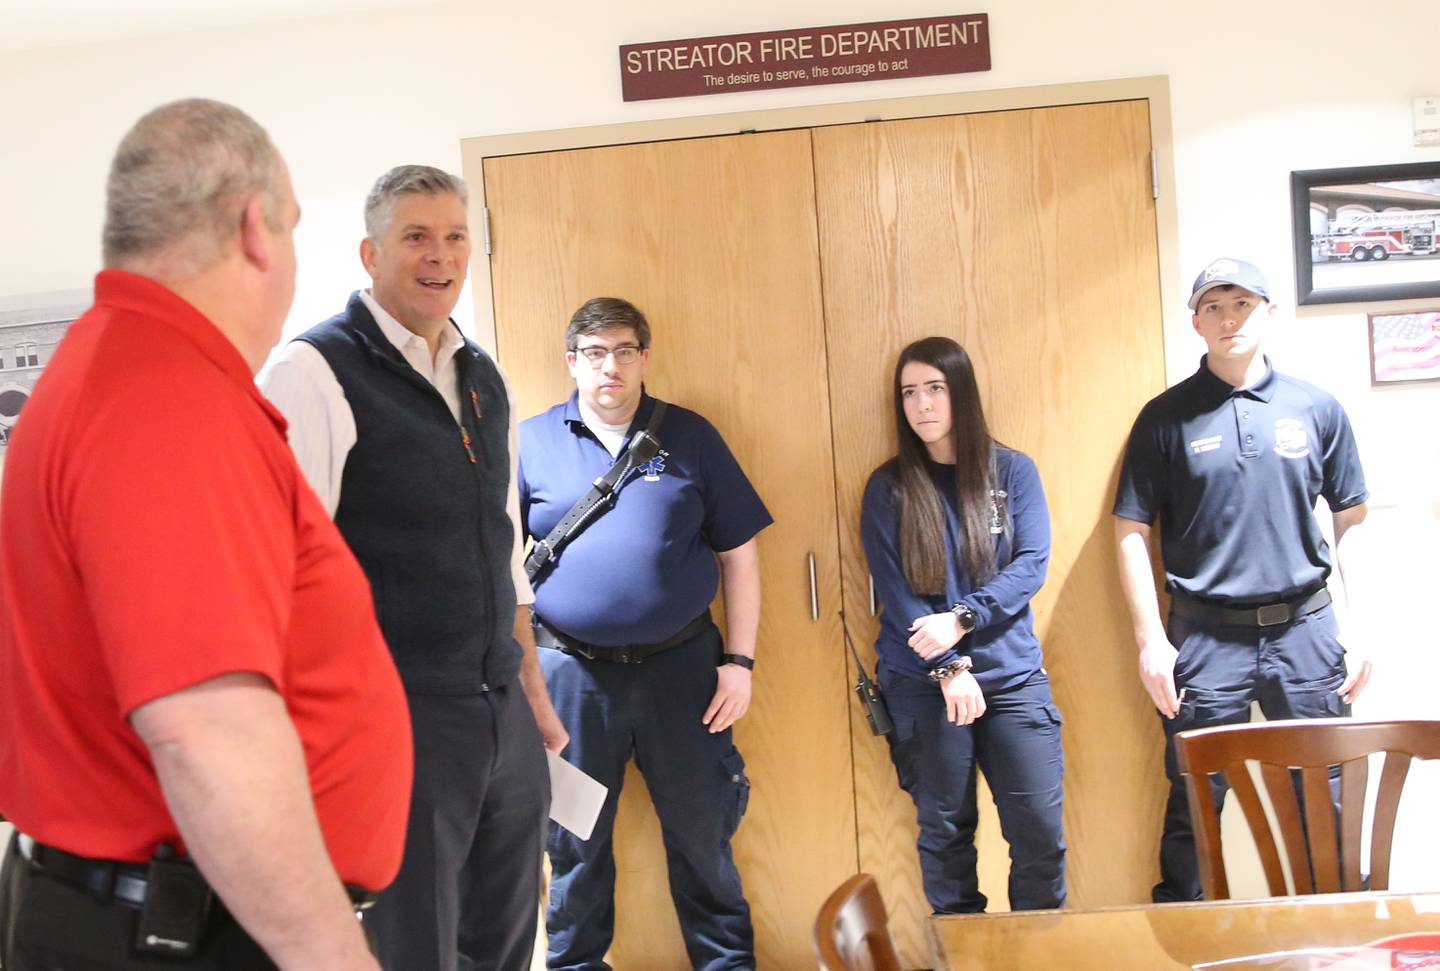 U.S. Rep. Darin LaHood (R-Illinois) meets with Streator Fire Chief Gary Bird and other firefighters as he tours the fire department on Tuesday, Feb. 14, 2023 in Streator.